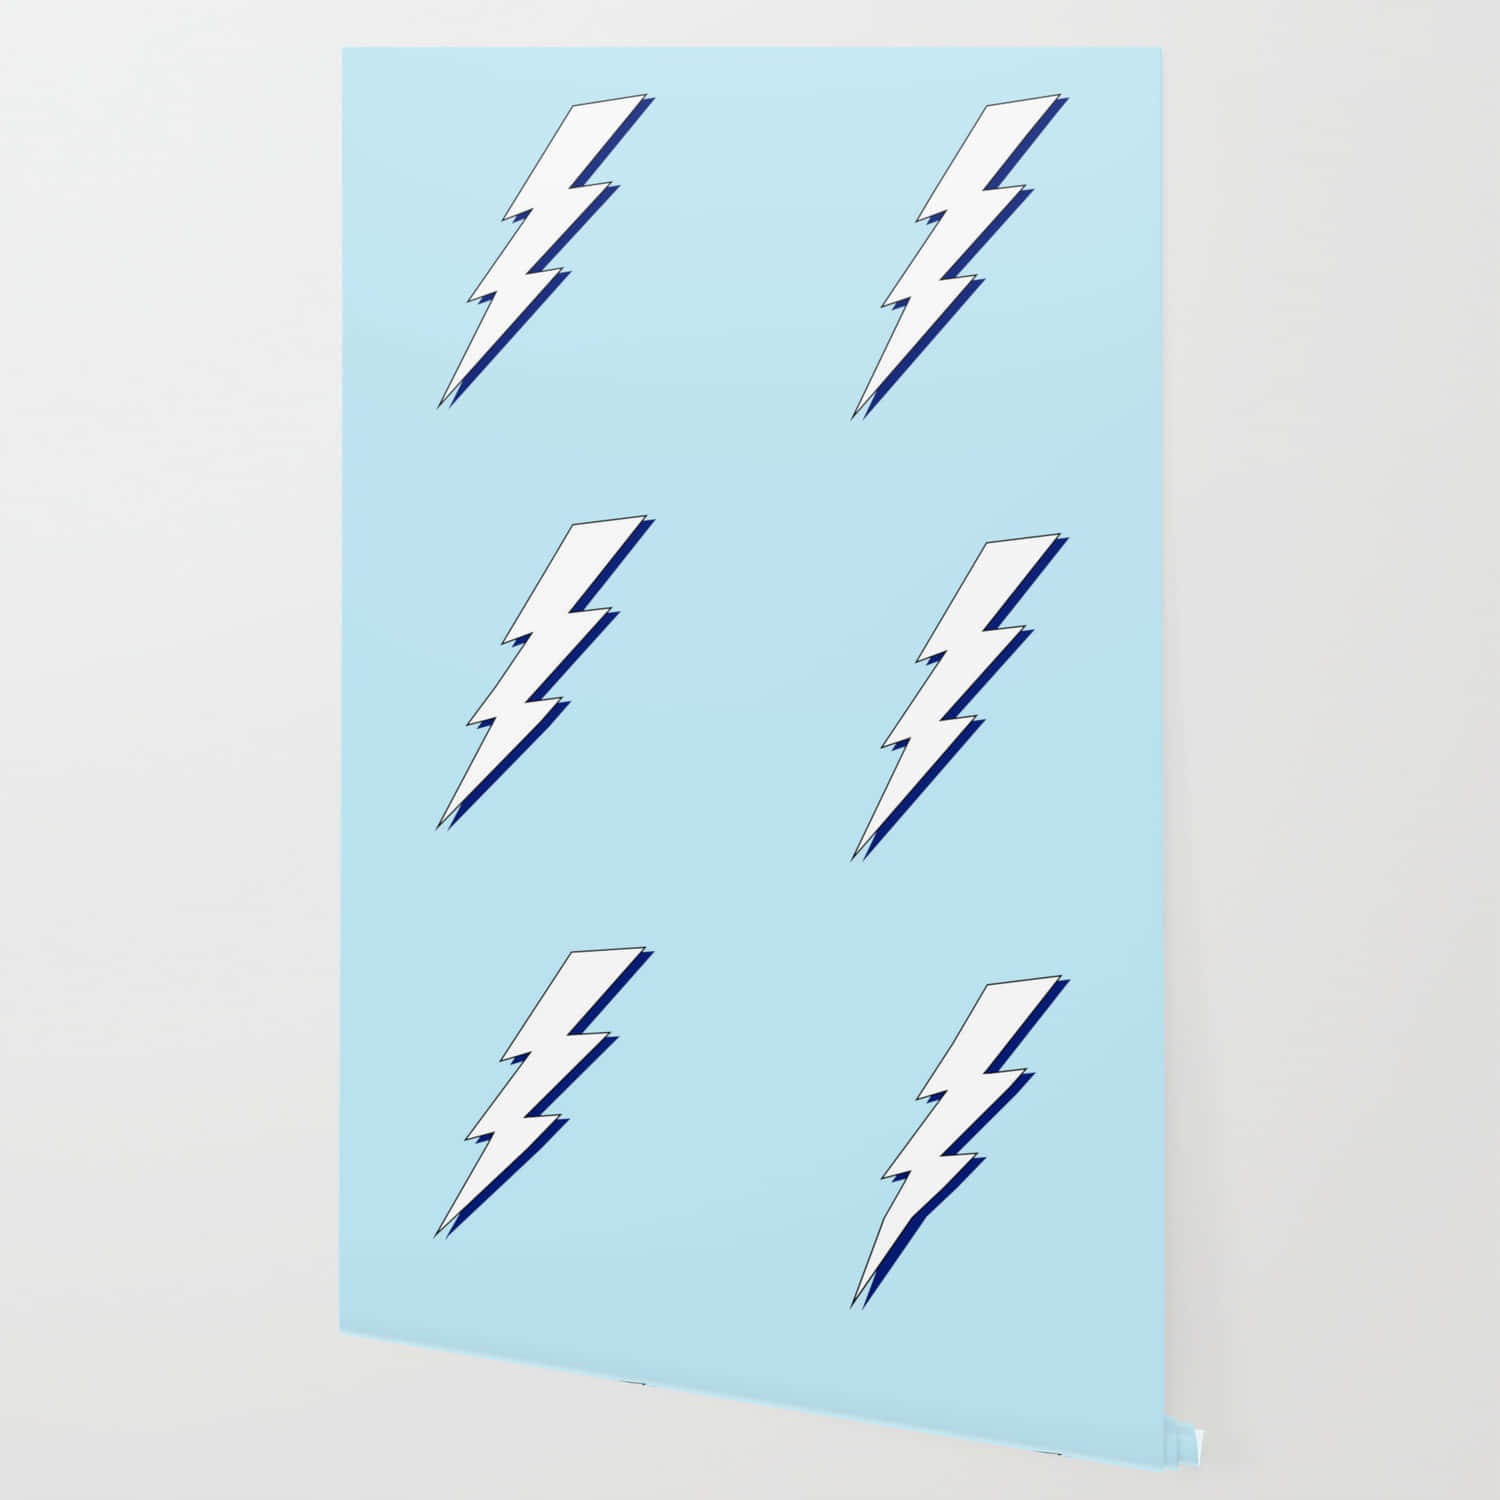 Charge up your day with the Lightning Bolt Iphone Wallpaper